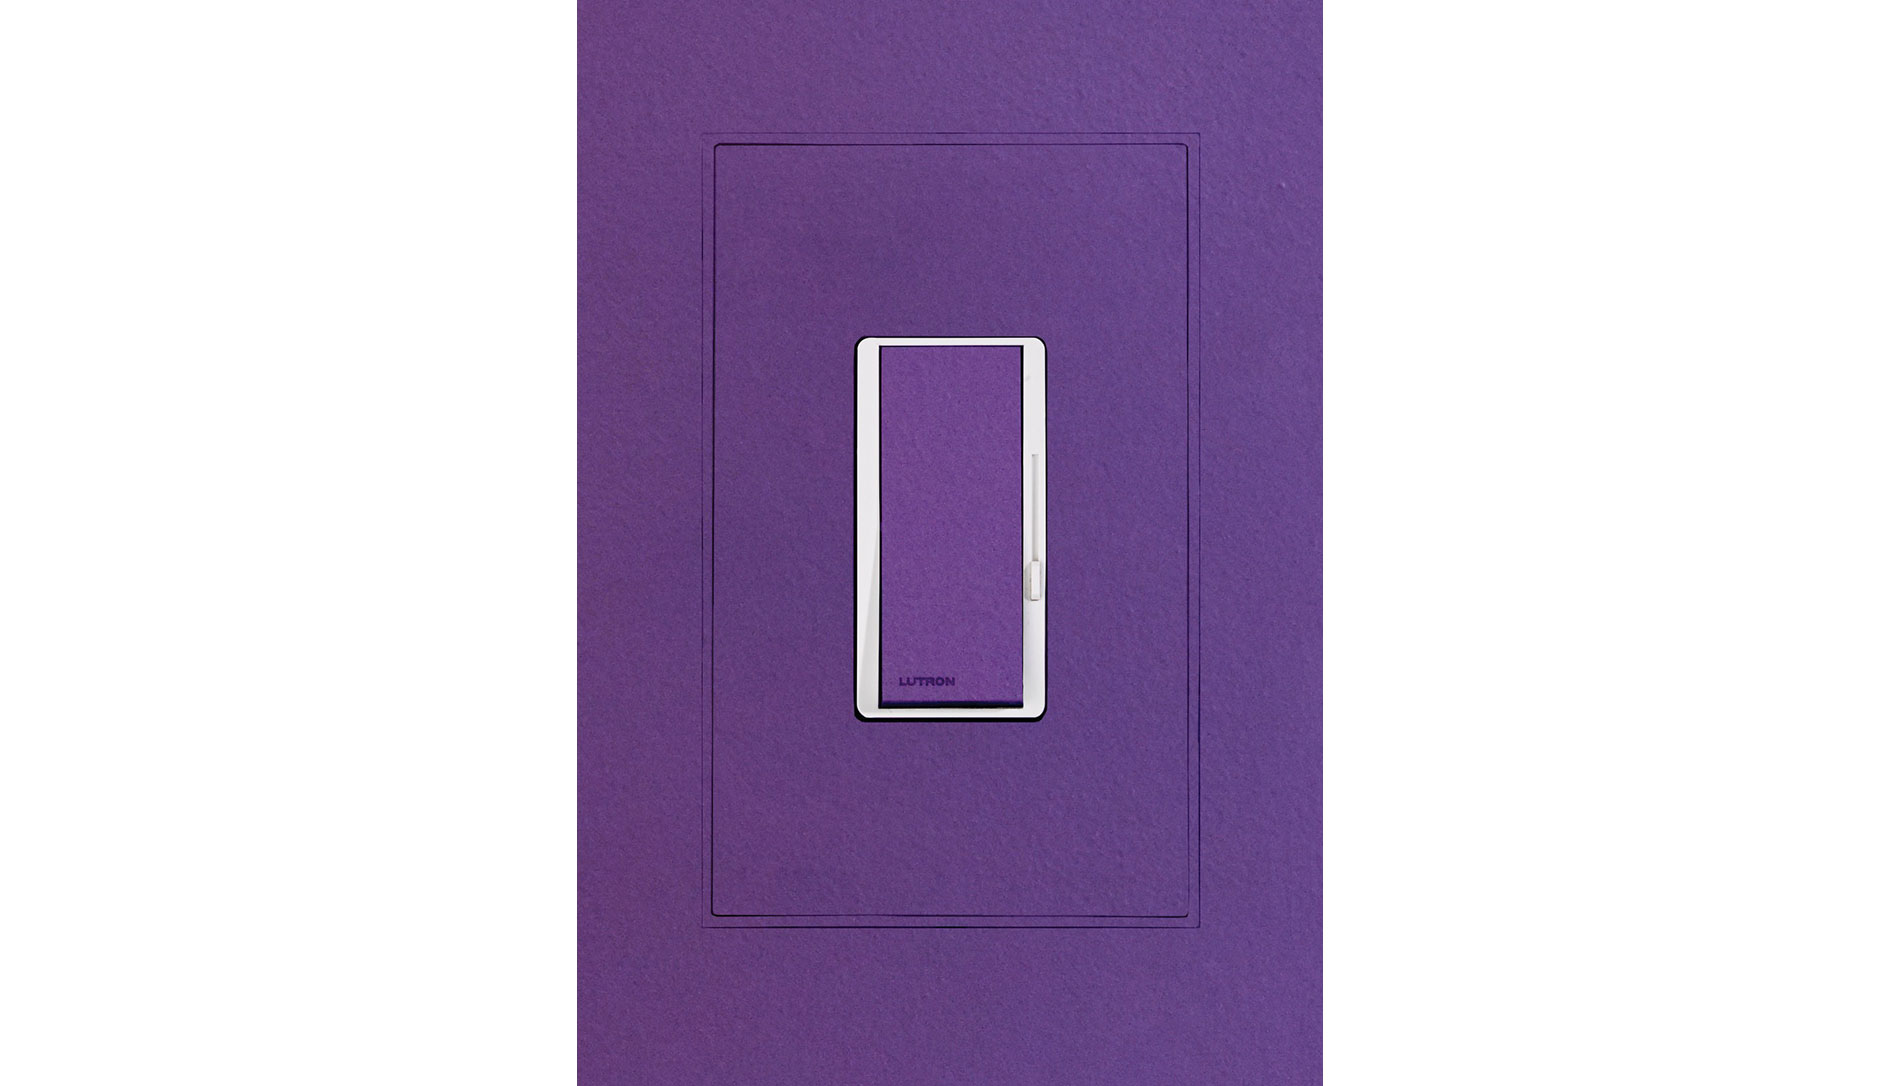 Purple inset outlet and switch covers. Image by Hide-A-Trim.